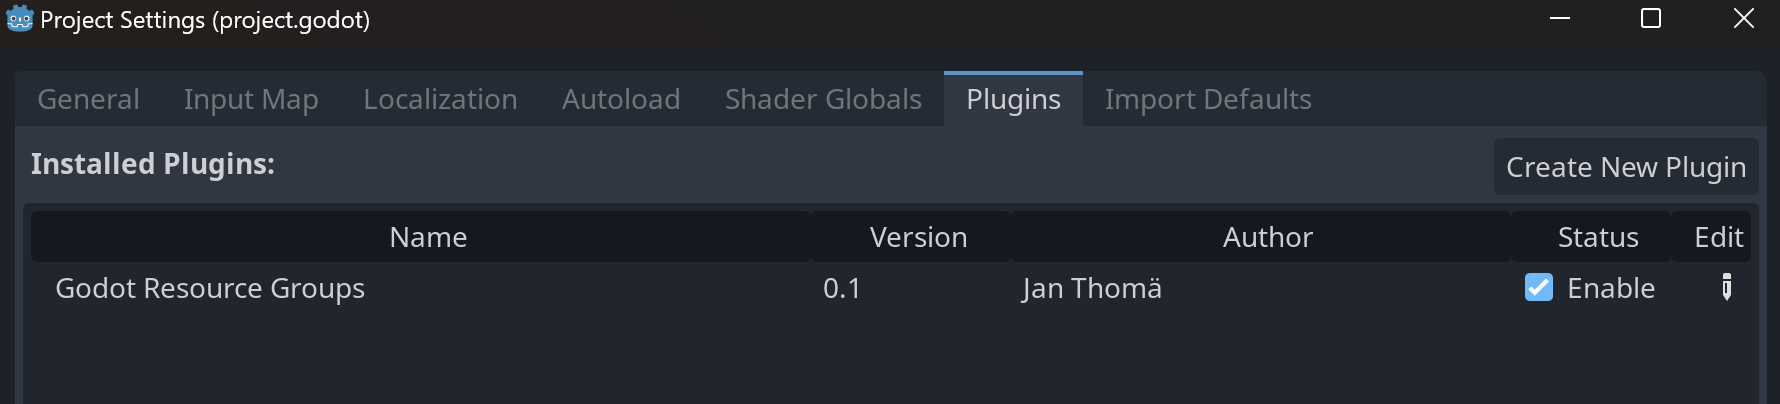 Enabling the plugin in the project settings